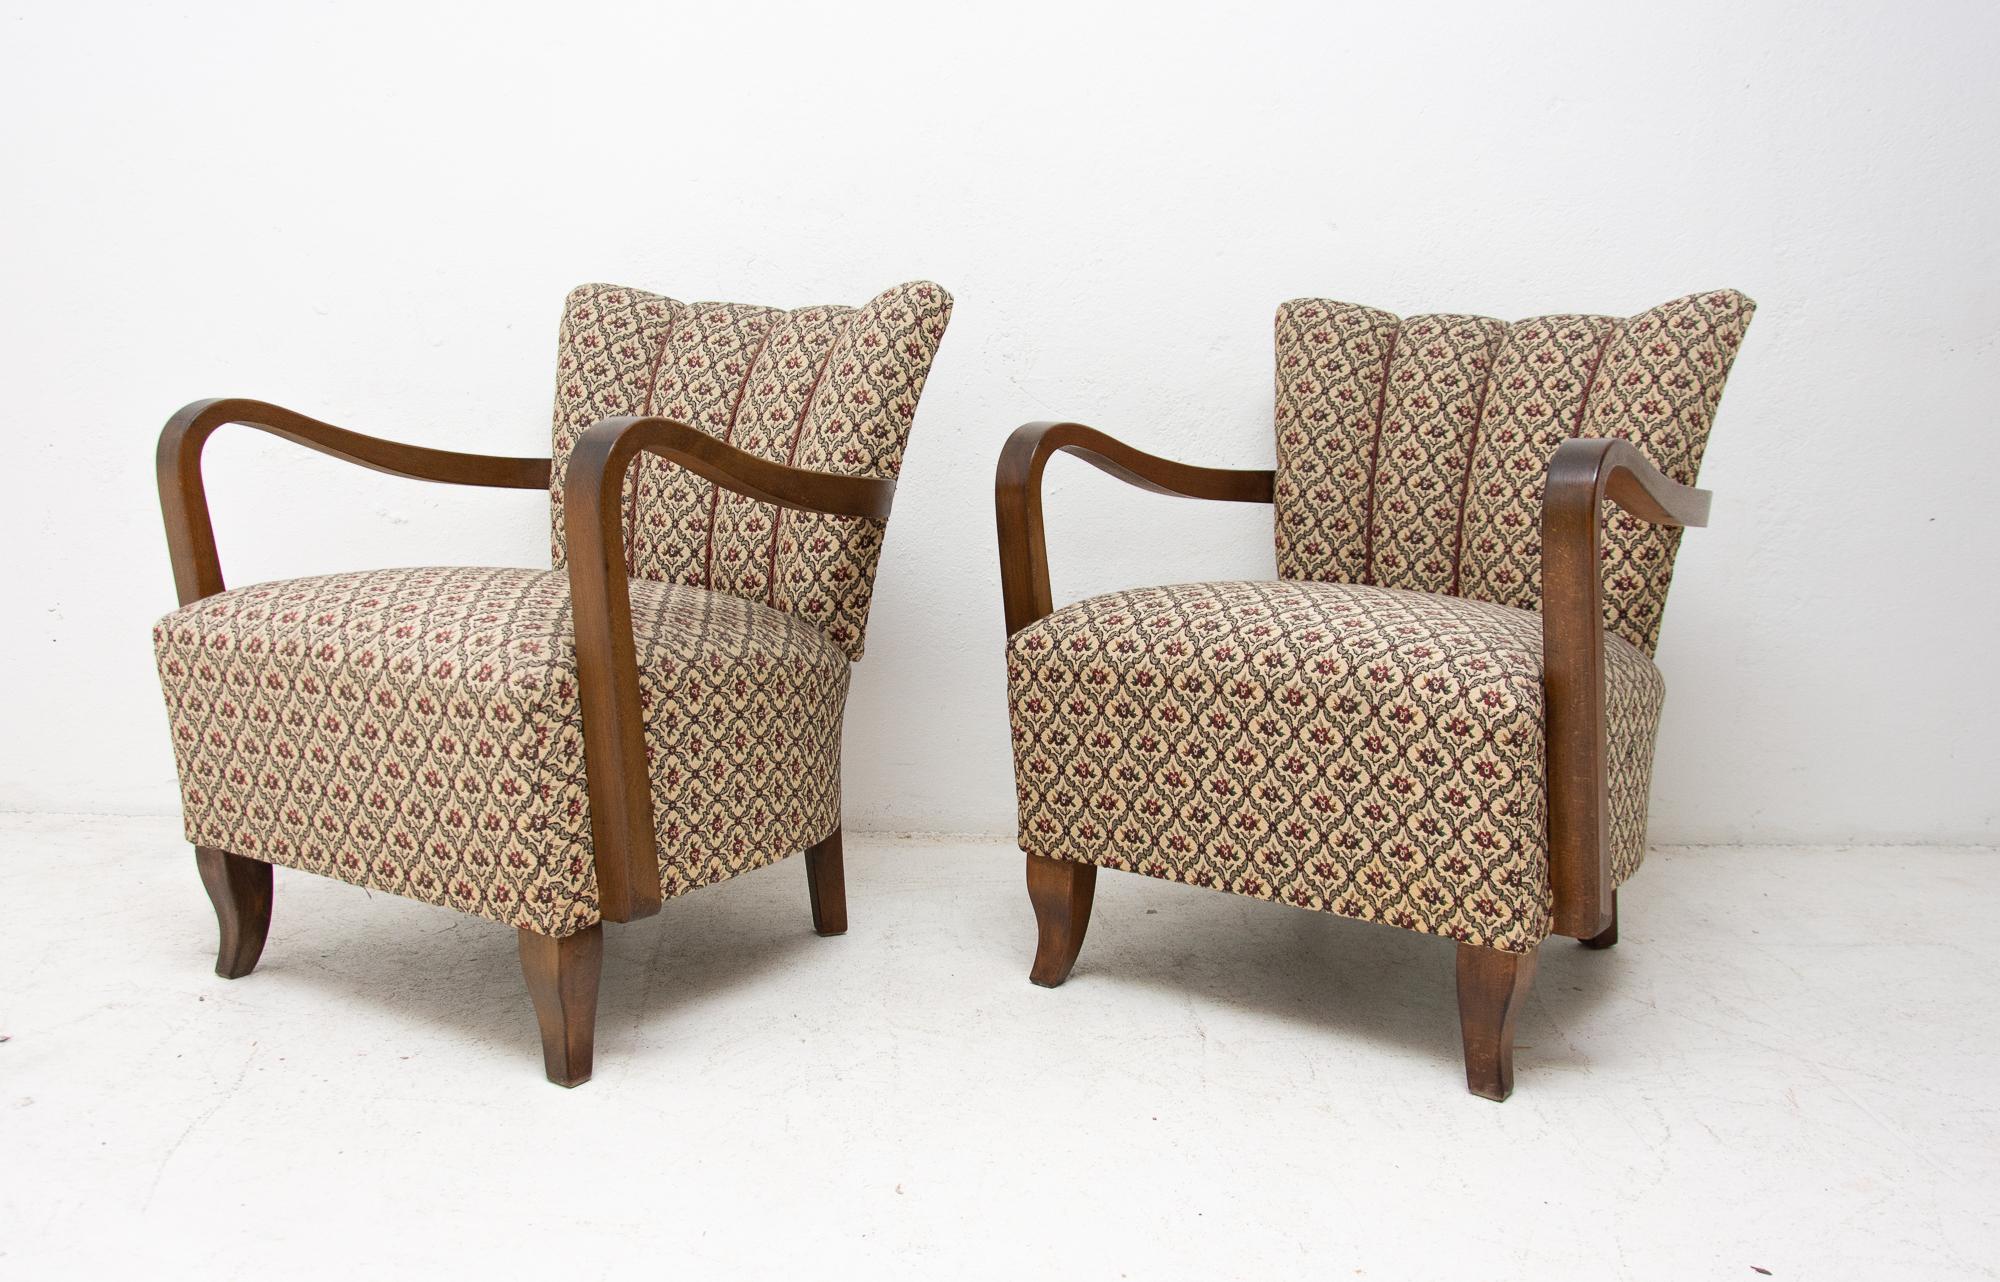 20th Century Pair of Cocktail Armchairs by Jindrich Halabala, Czechoslovakia, 1950s